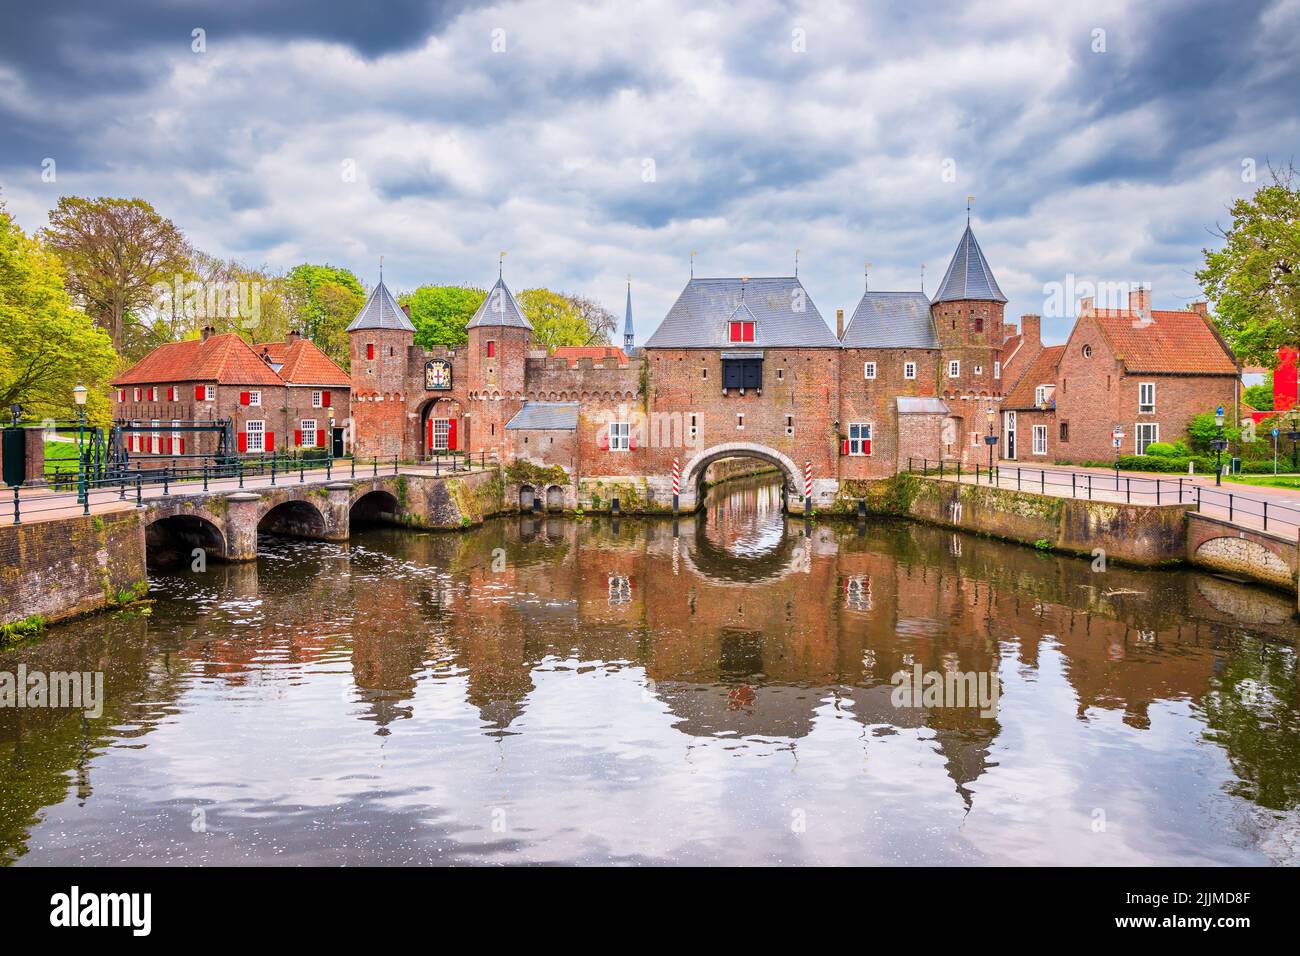 Amersfoort, Netherlands. The medieval gate Koppelport on a cloudy day. Stock Photo